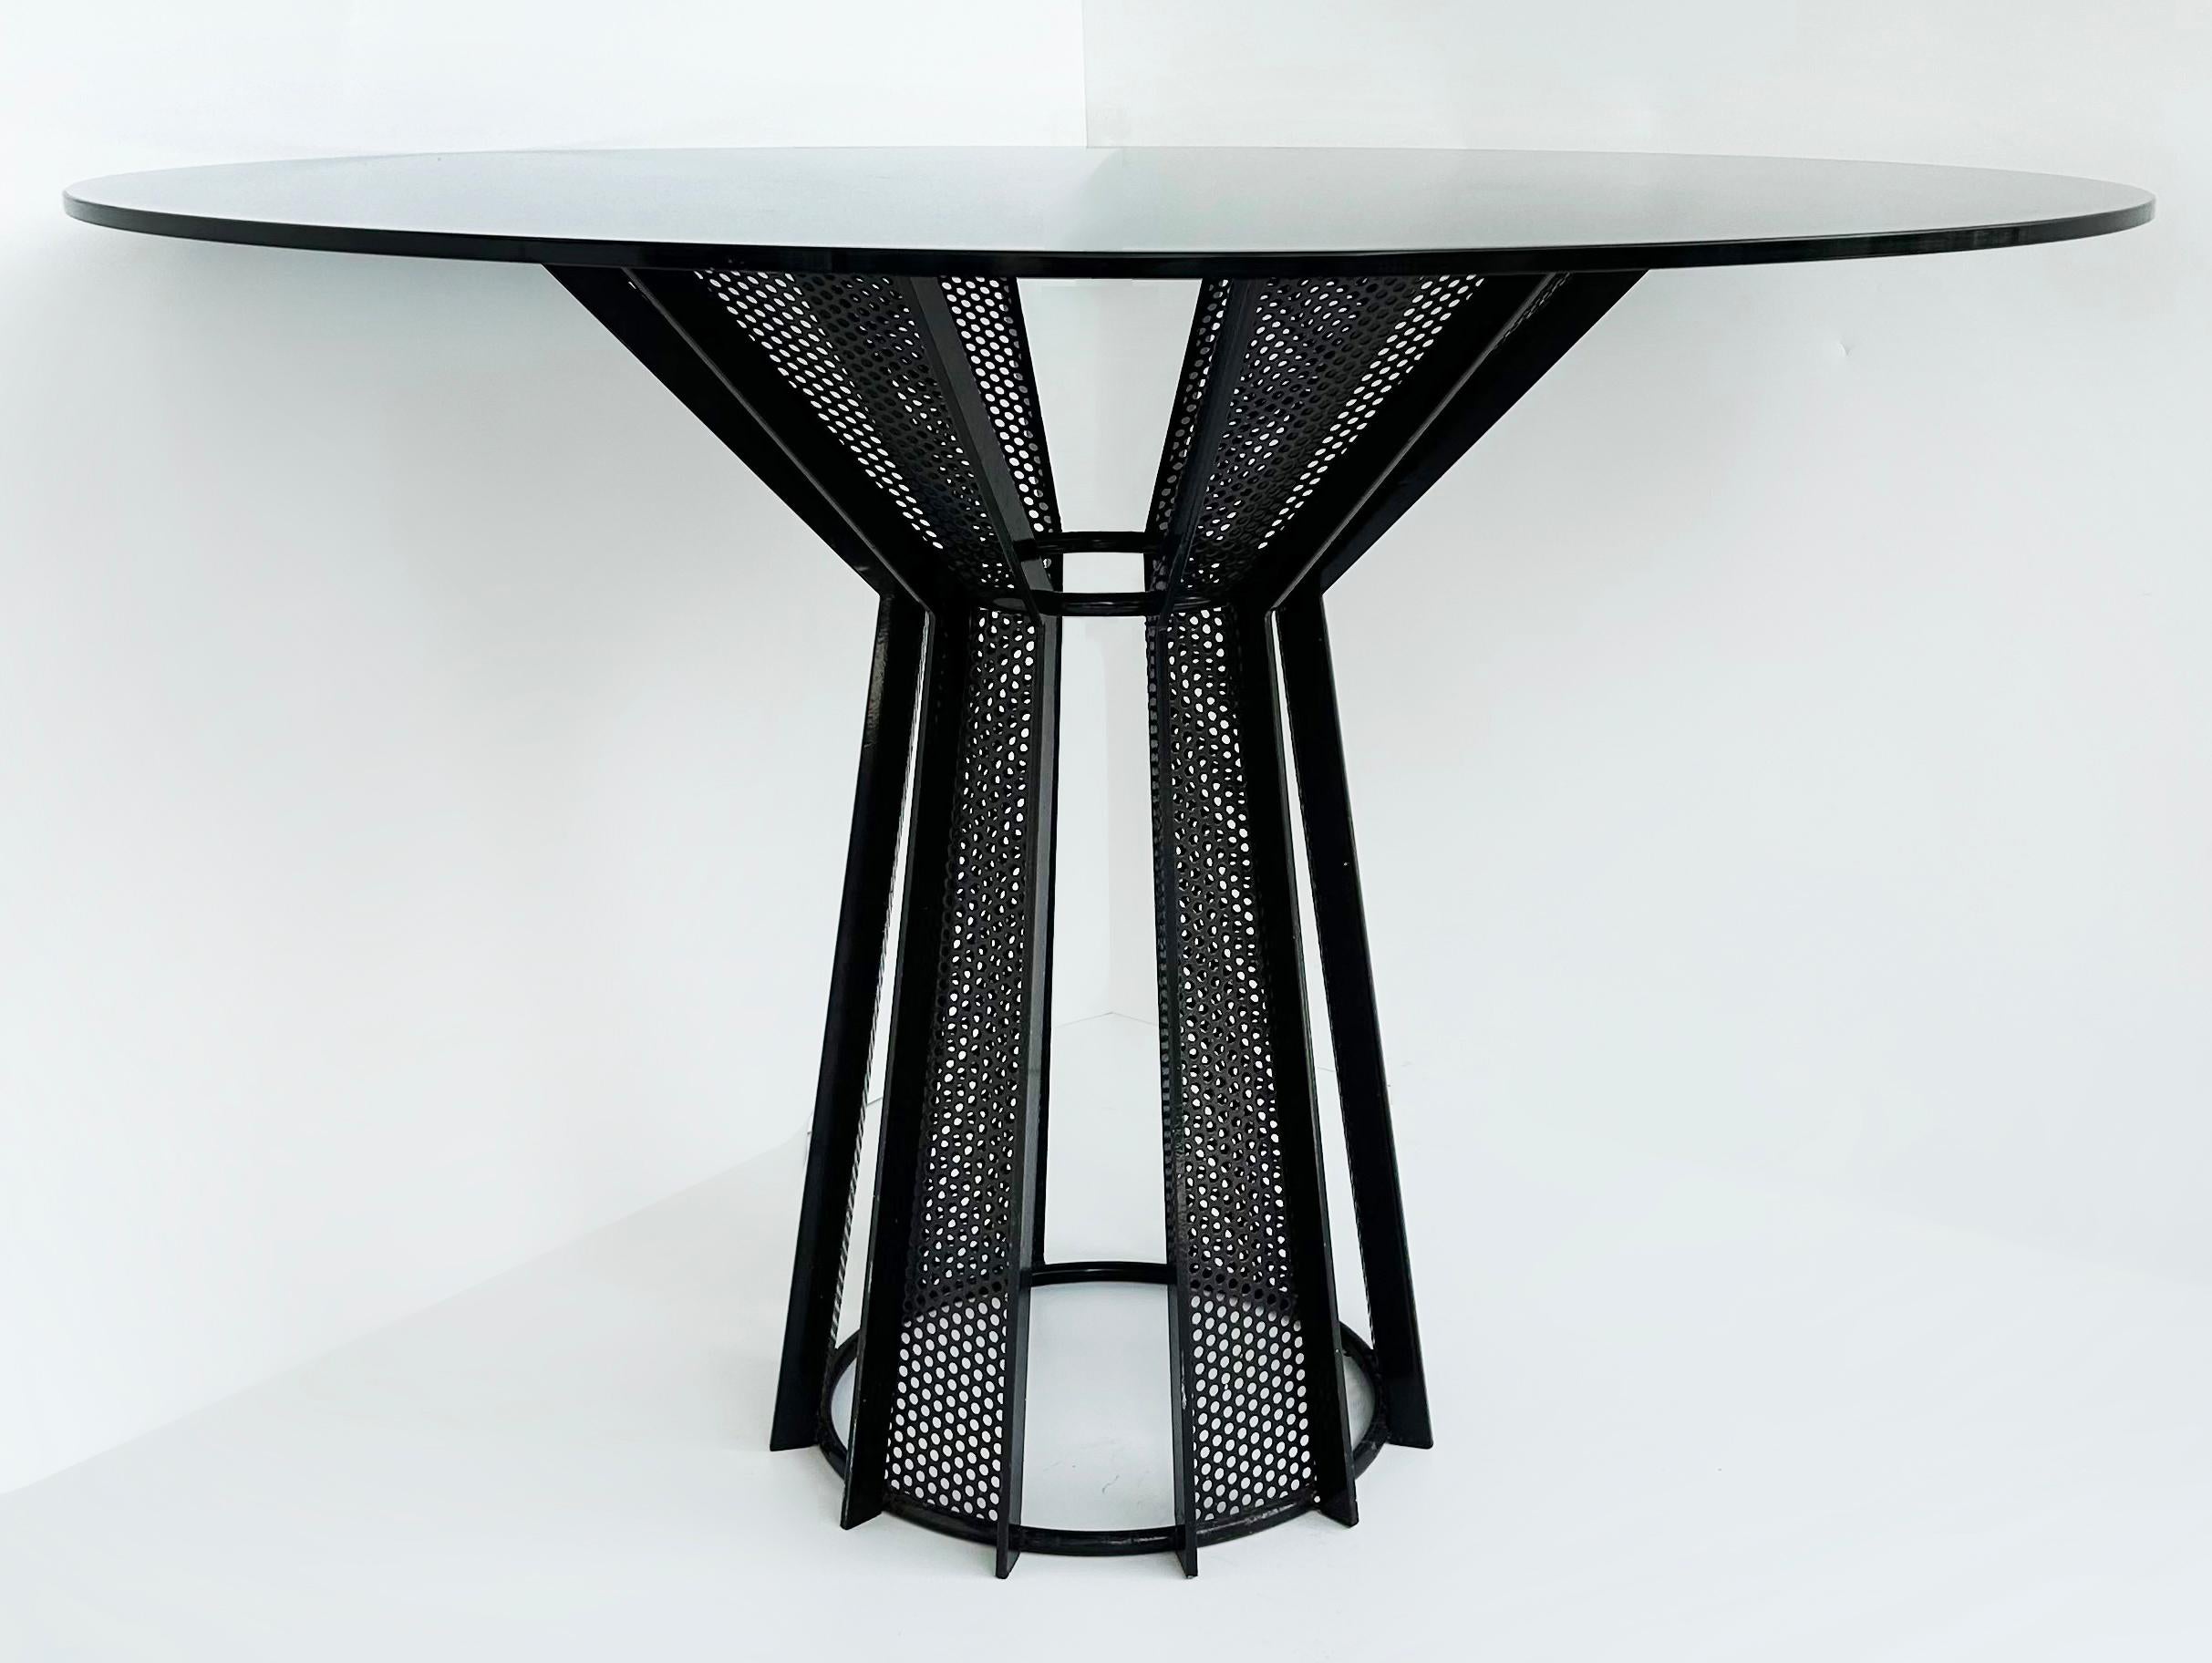 




James De Wulf Metal Harvest Dining Table Base, Glass Top

Offered for sale is a James De Wulf Harvest dining table metal base that seats four comfortably. This architecturally designed table has a round smoked glass top added rather than the